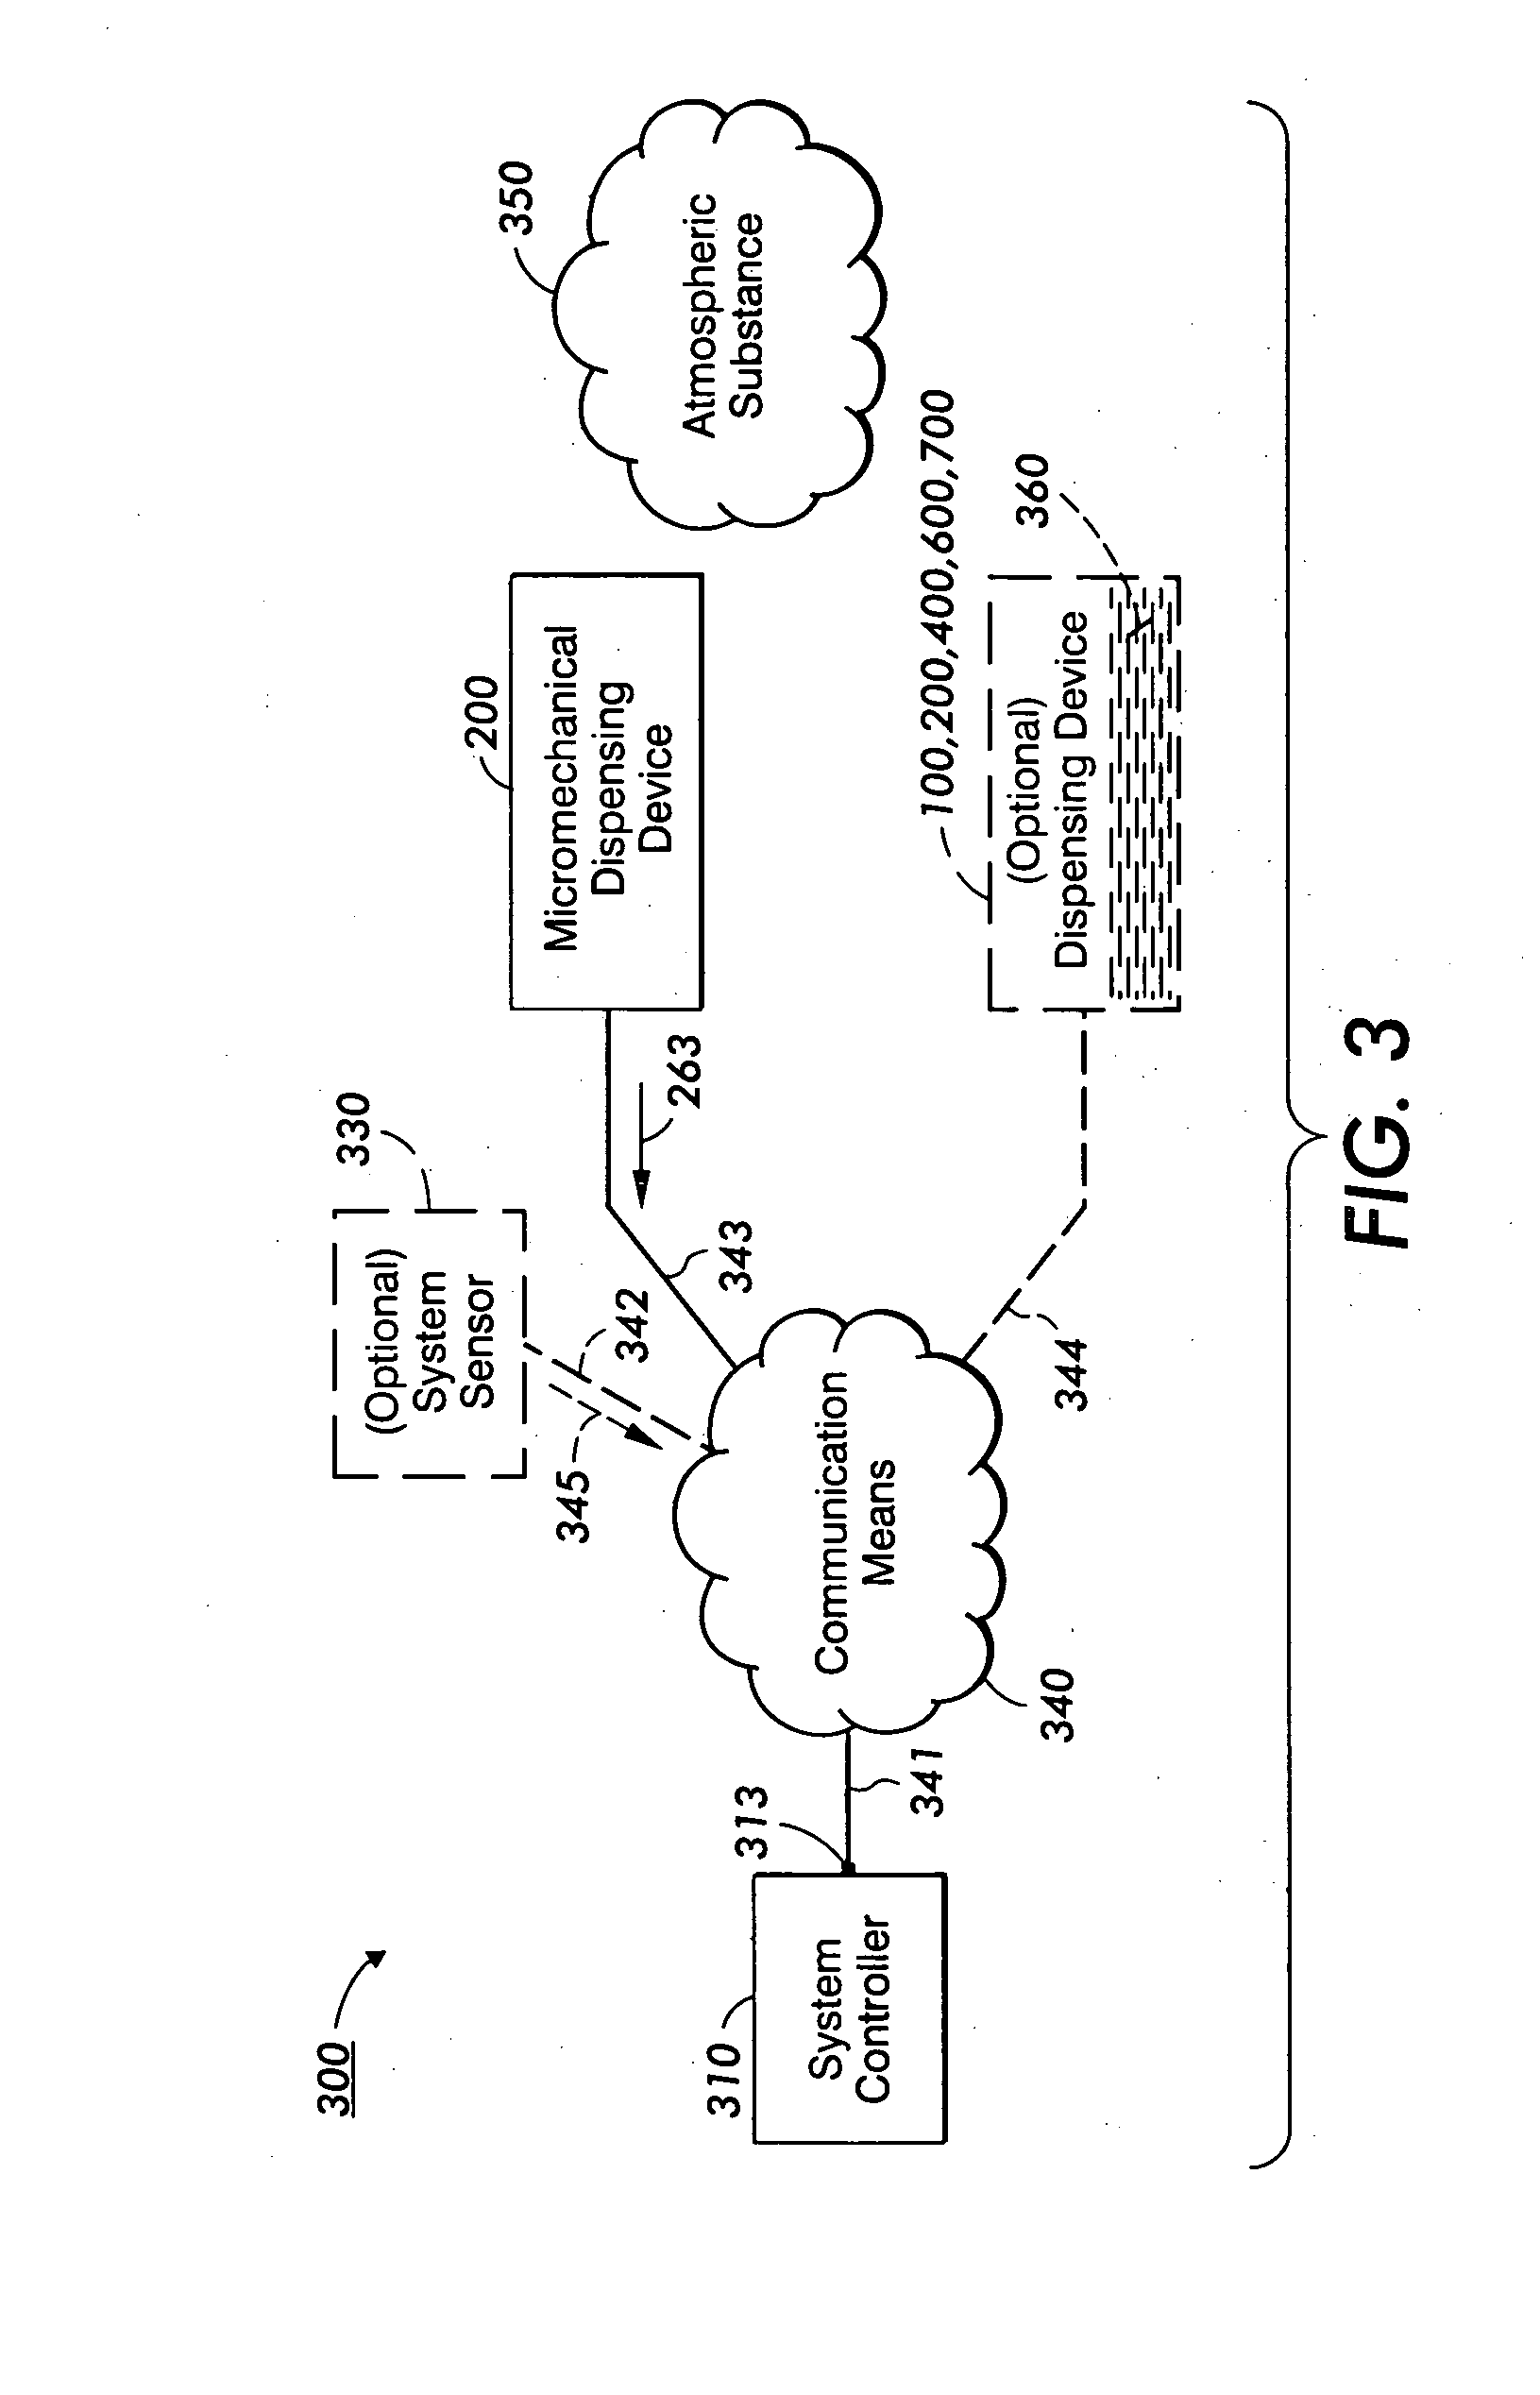 Device and system for dispensing fluids into the atmosphere